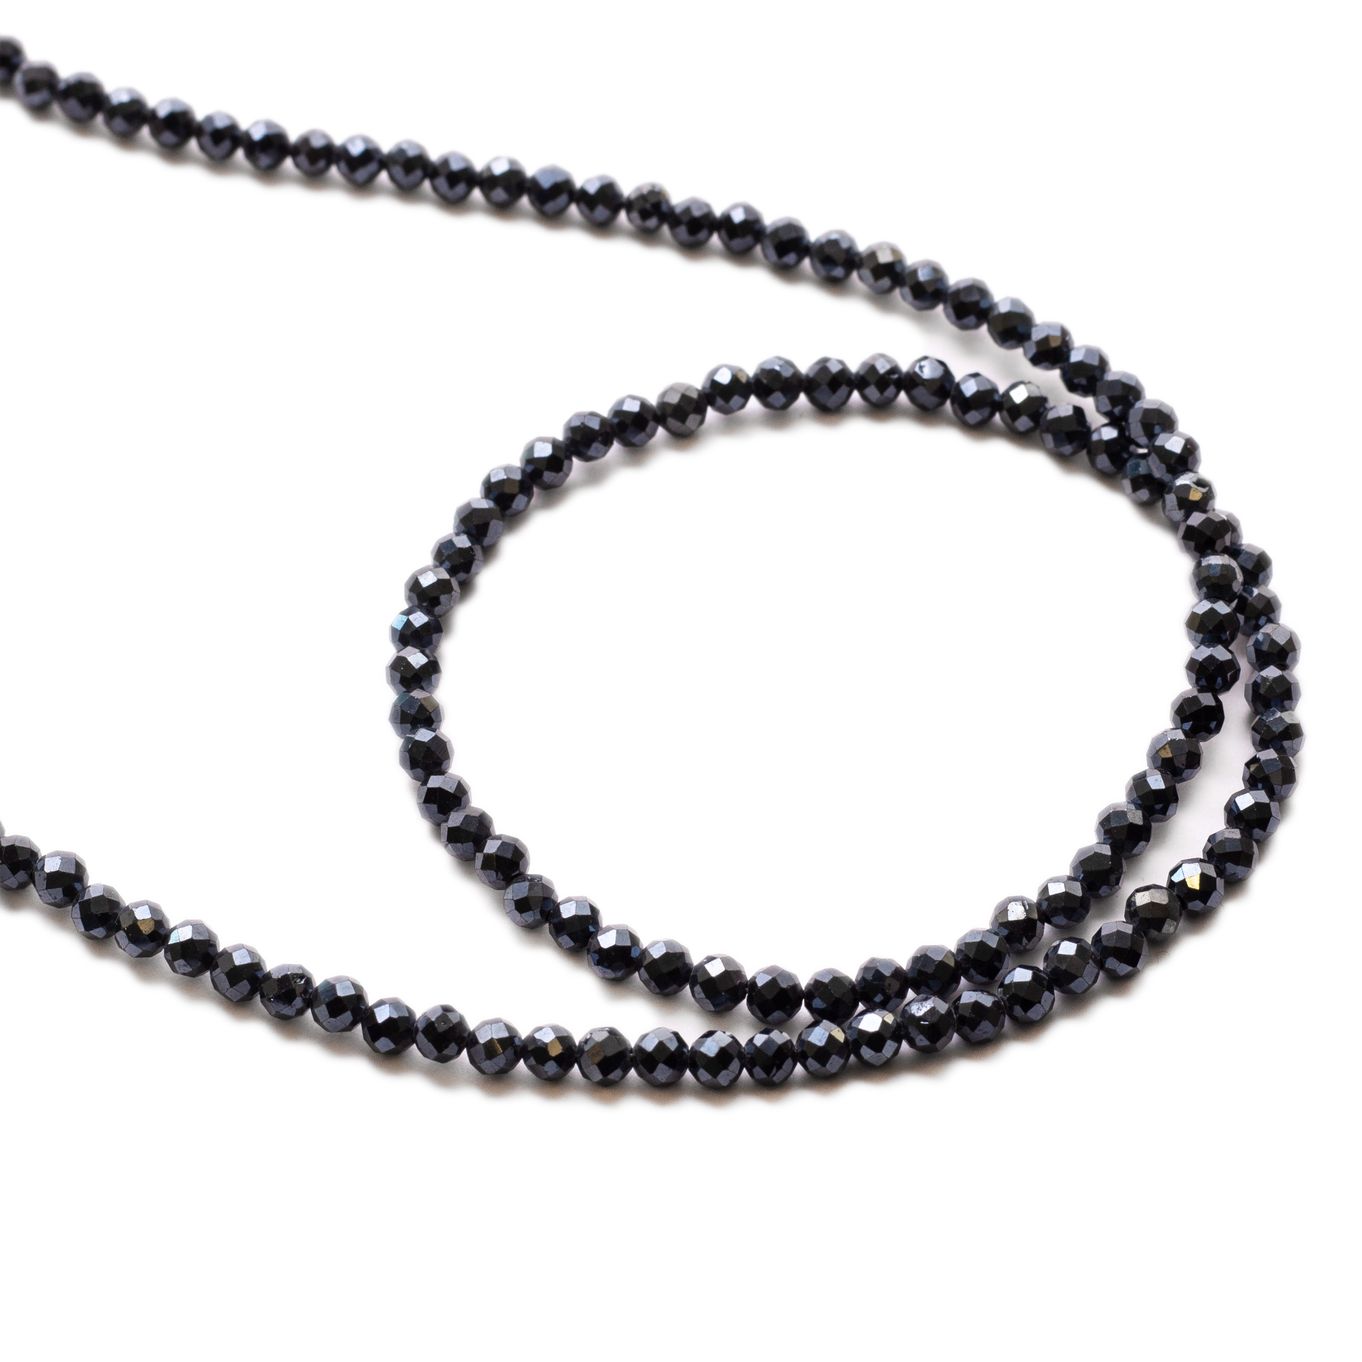 Midnight Blue Spinel Faceted Round Beads - Approx 3mm 